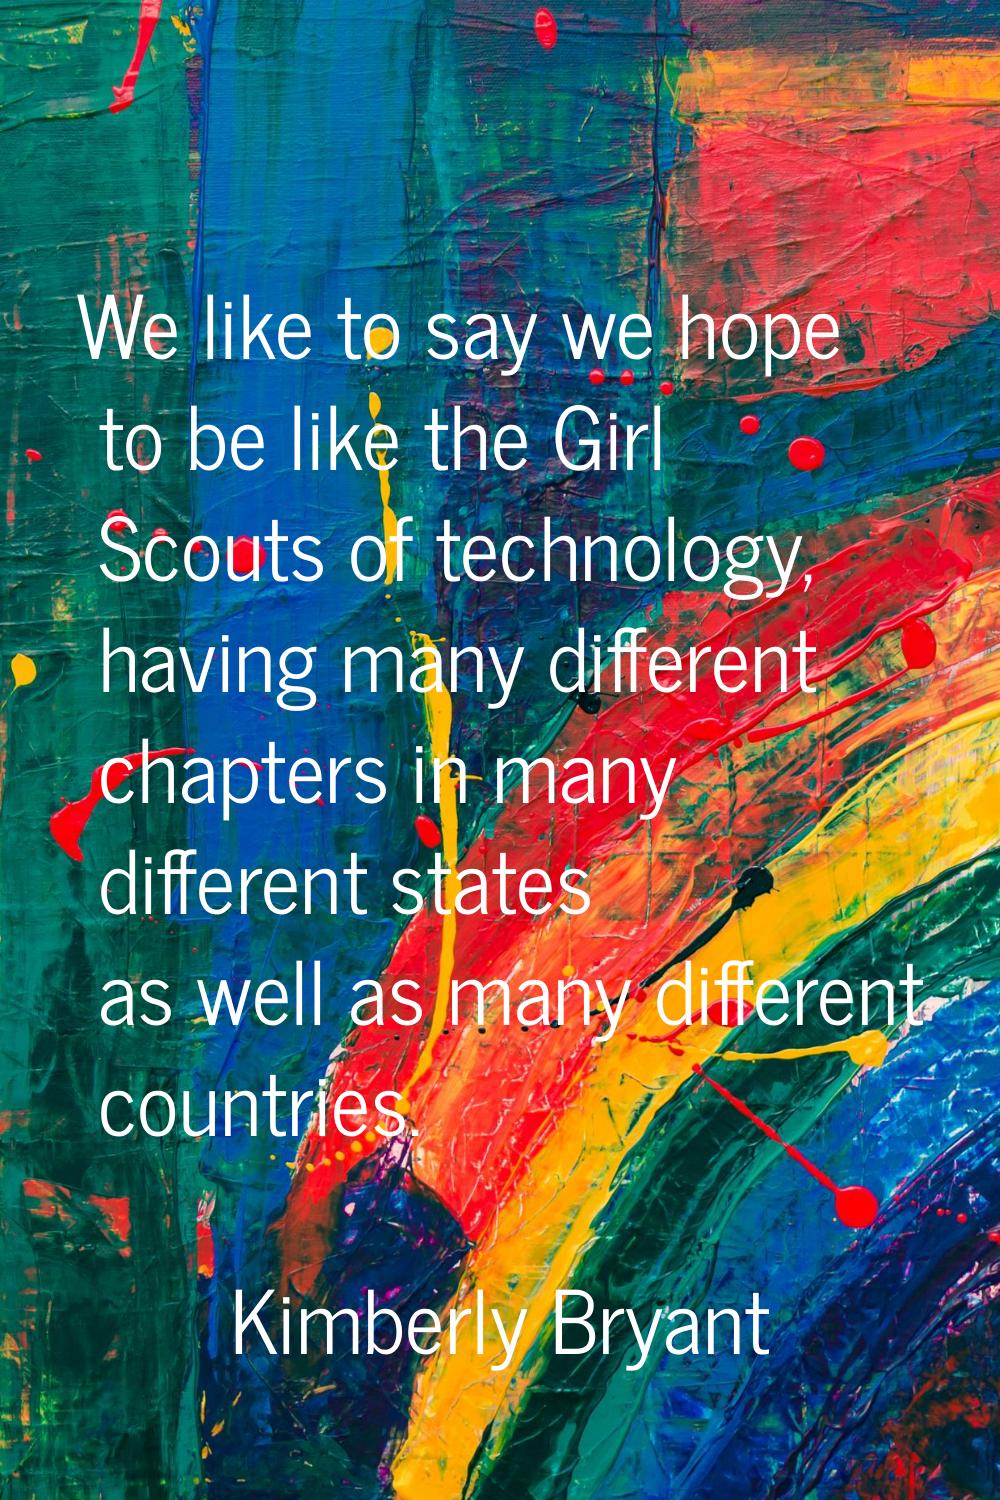 We like to say we hope to be like the Girl Scouts of technology, having many different chapters in 